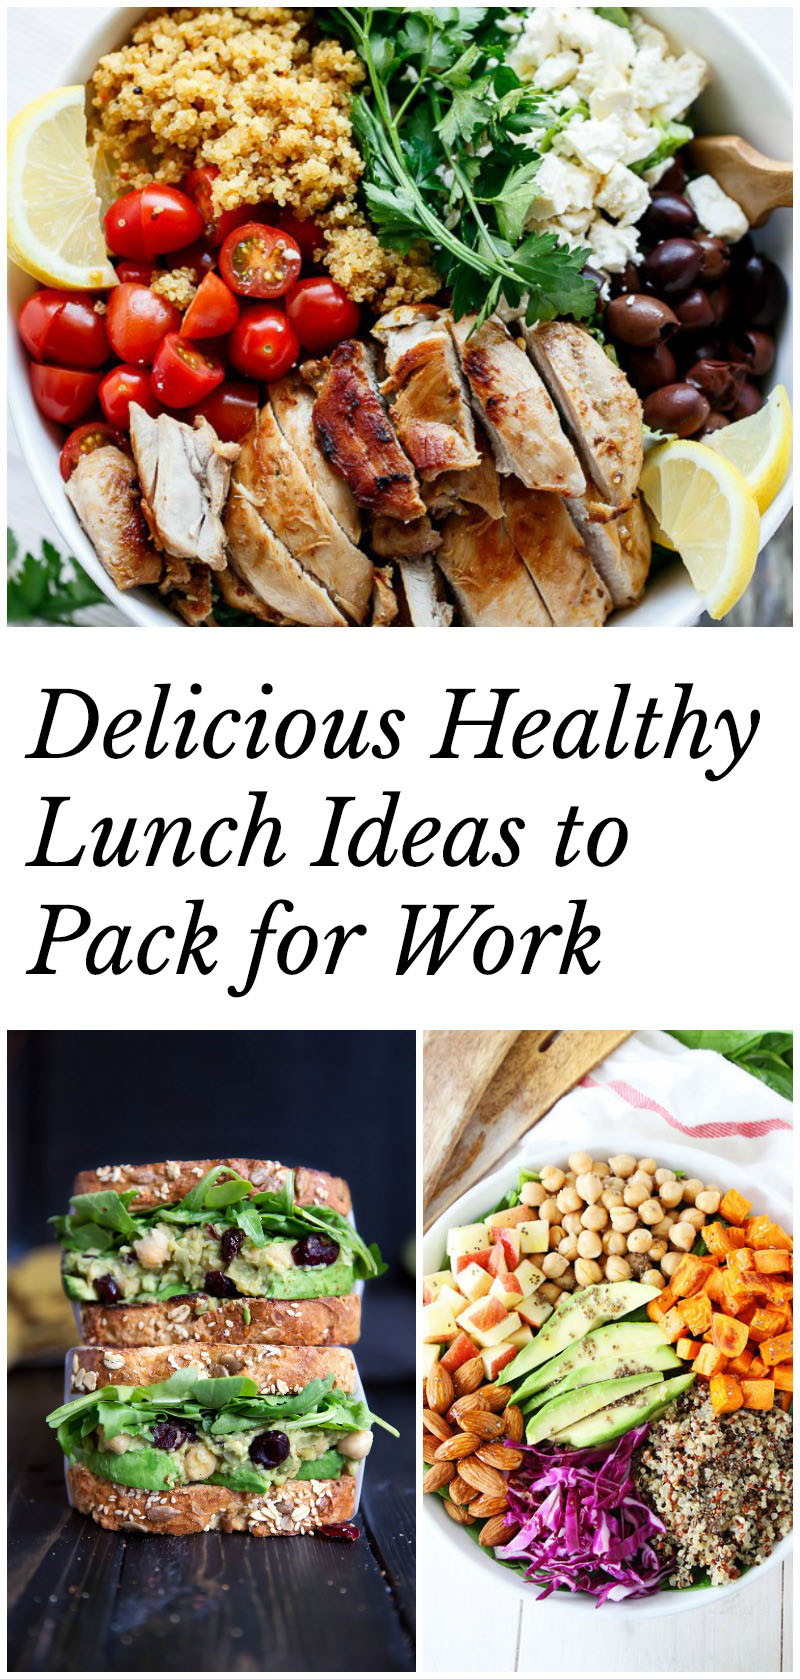 Healthy Snacks For Work Lunch
 Healthy Lunch Ideas to Pack for Work 40 recipes